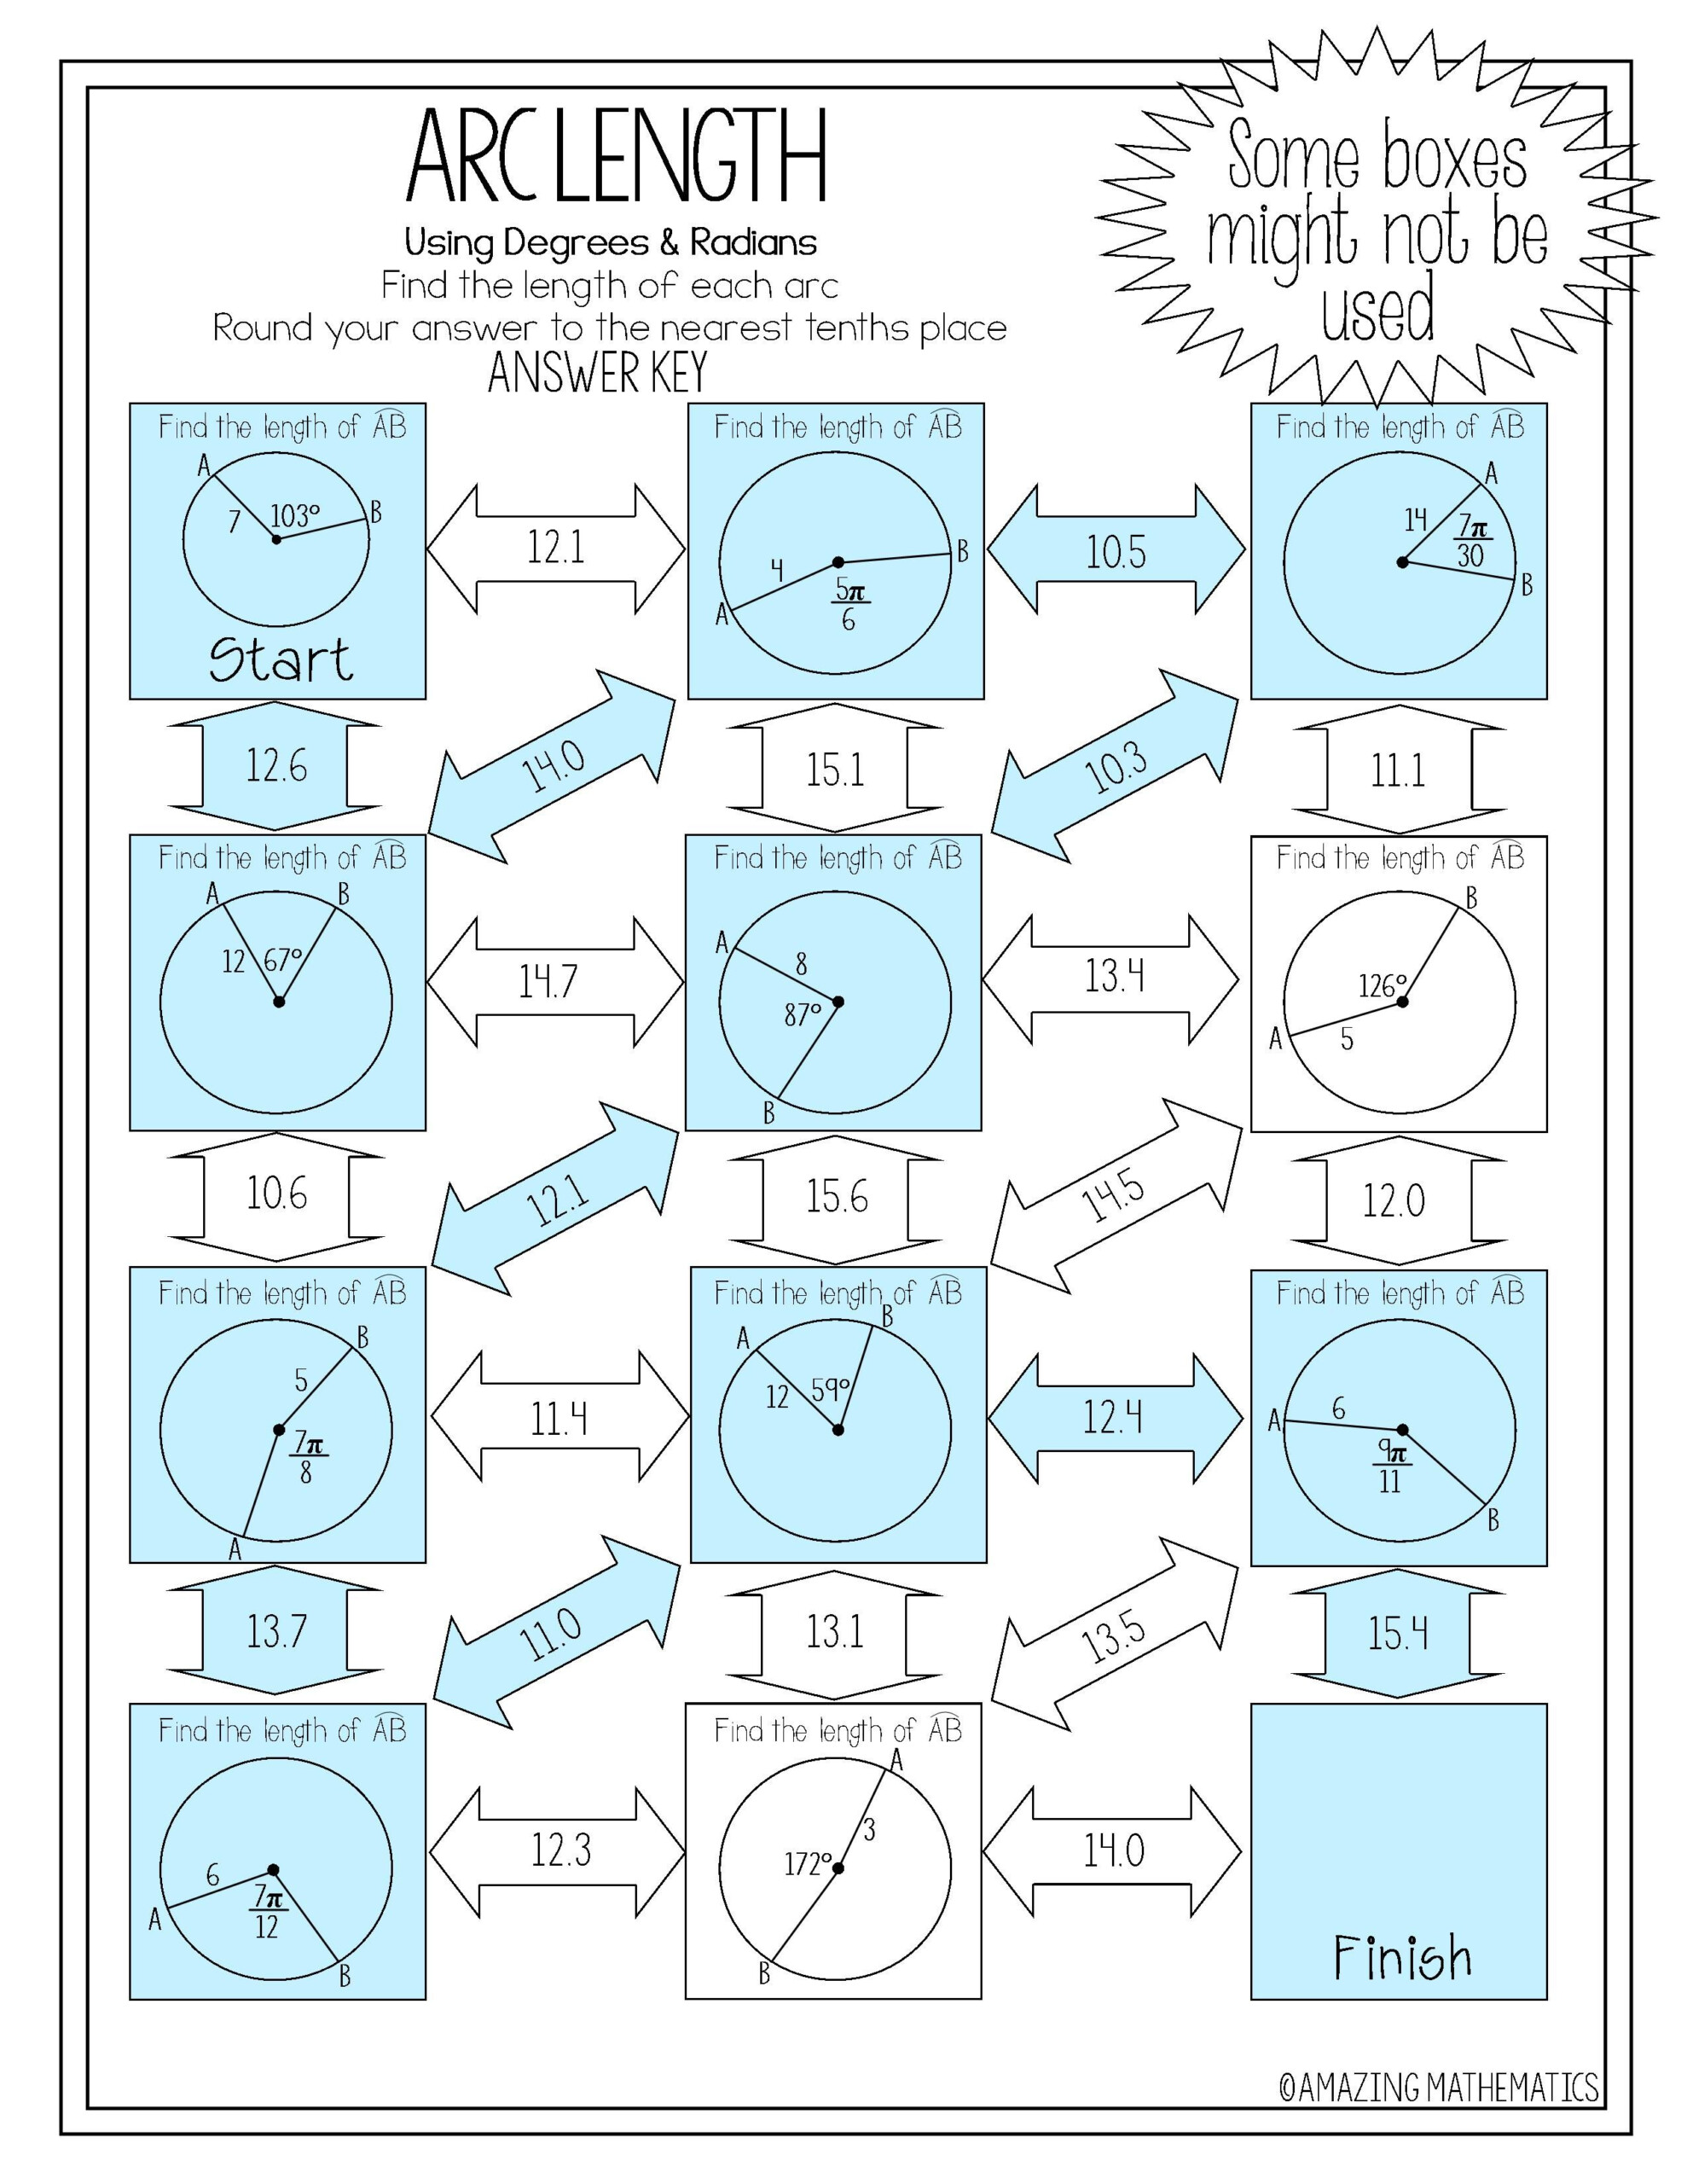 Pin On Geometry Worksheets Activities Ideas And Test Prep Resources